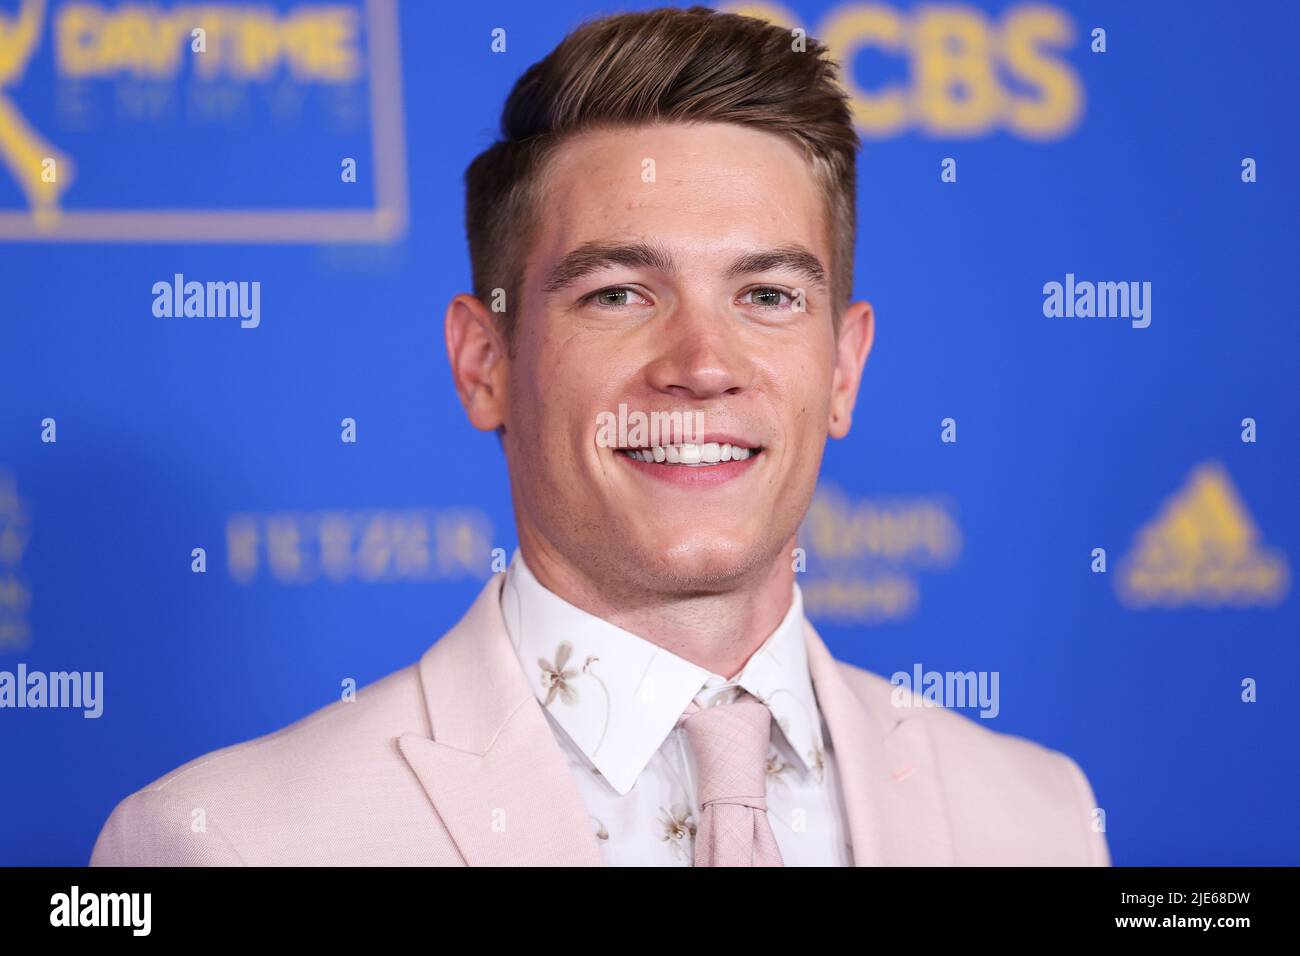 PASADENA, LOS ANGELES, CALIFORNIA, USA - JUNE 24: Lucas Adams arrives at the 49th Daytime Emmy Awards held at the Pasadena Convention Center on June 24, 2022 in Pasadena, Los Angeles, California, United States. (Photo by Xavier Collin/Image Press Agency) Stock Photo